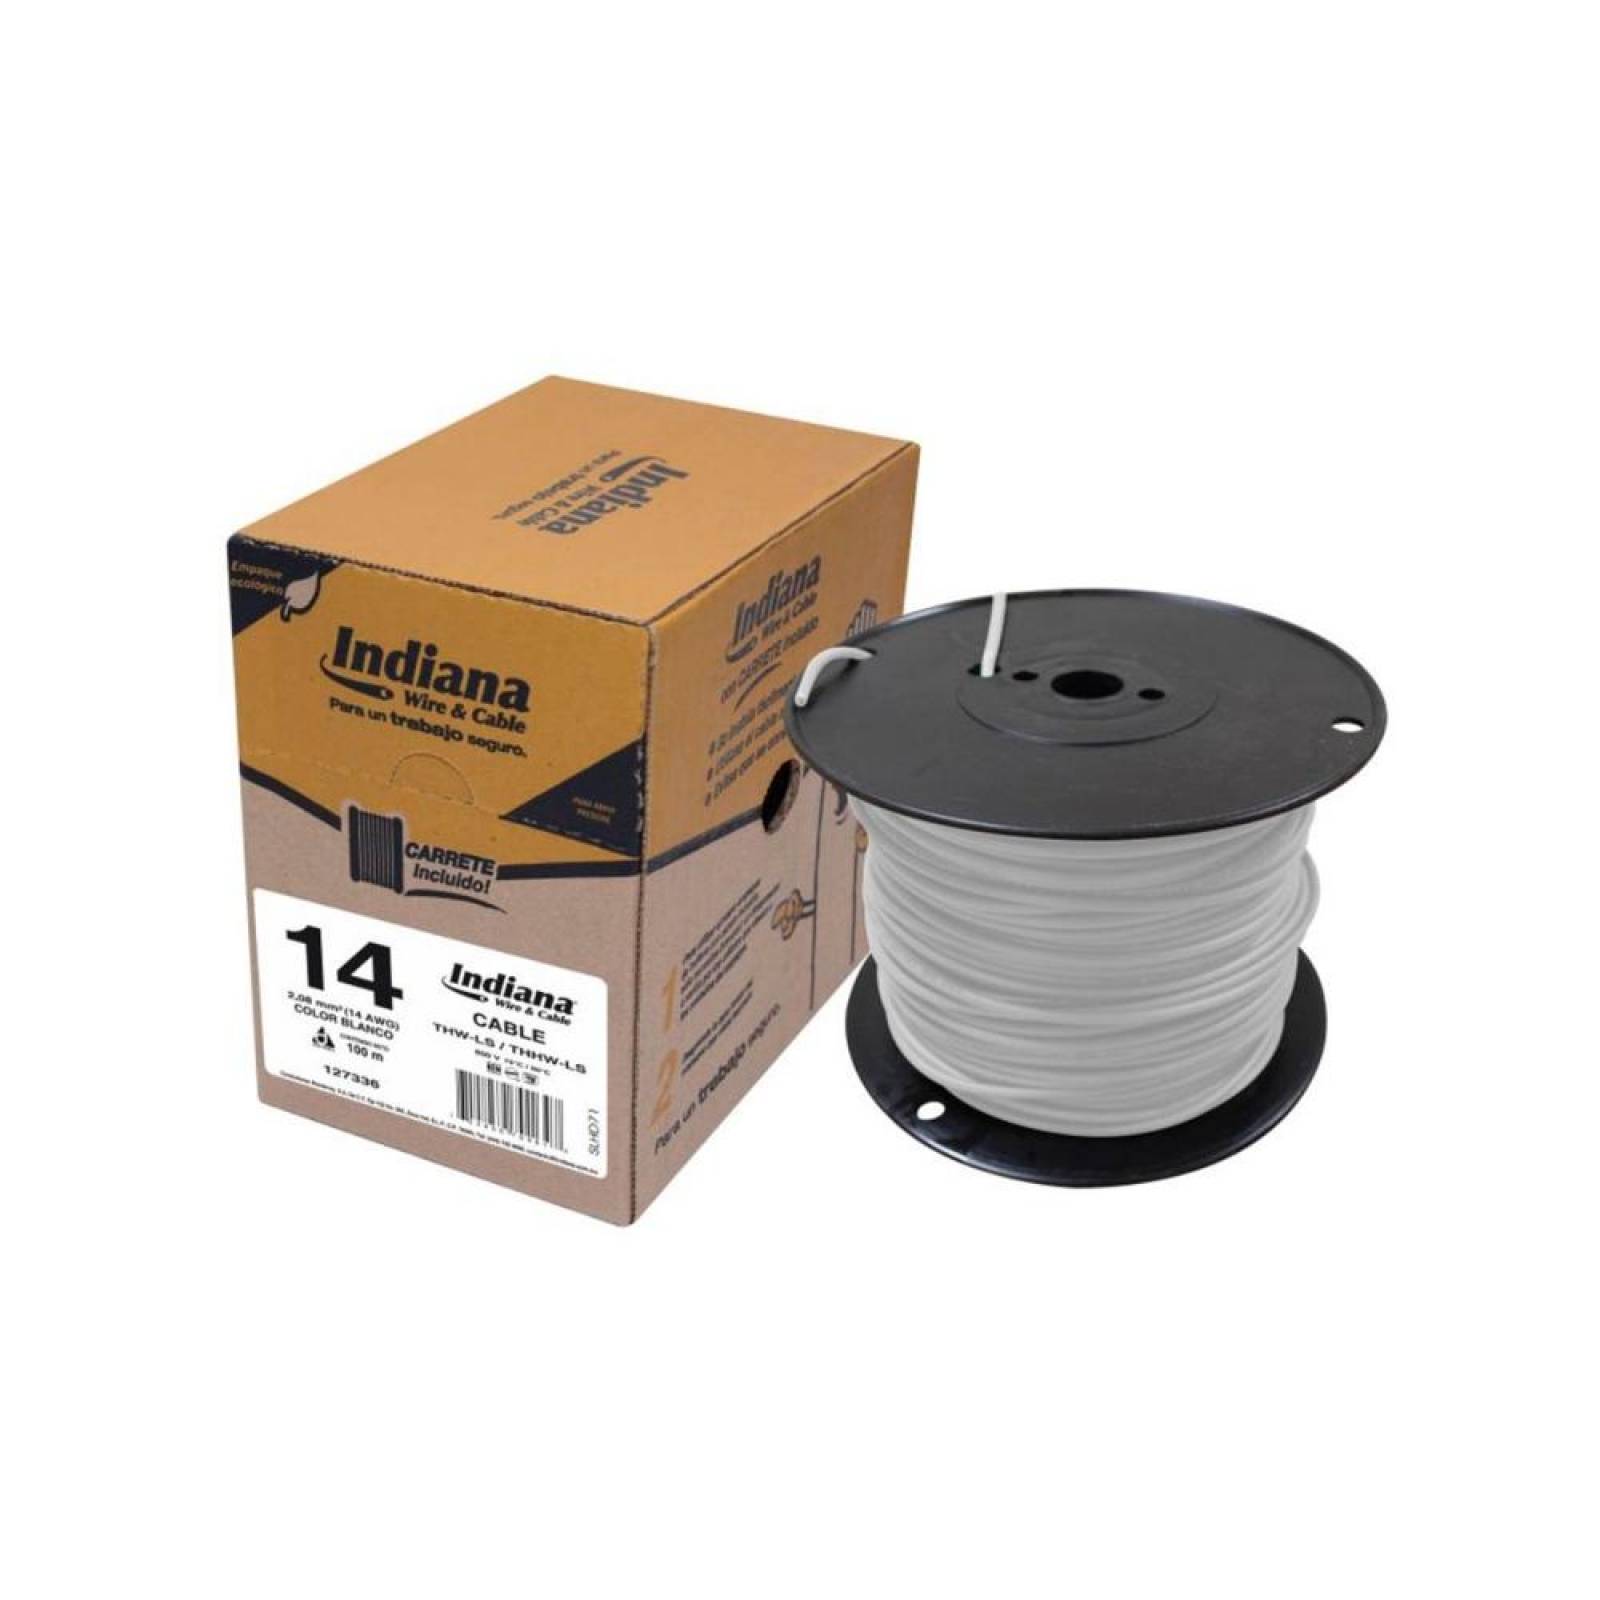 Cable Indiana Thw-ls/thhw-ls Calibre 14 Blanco 100 M 